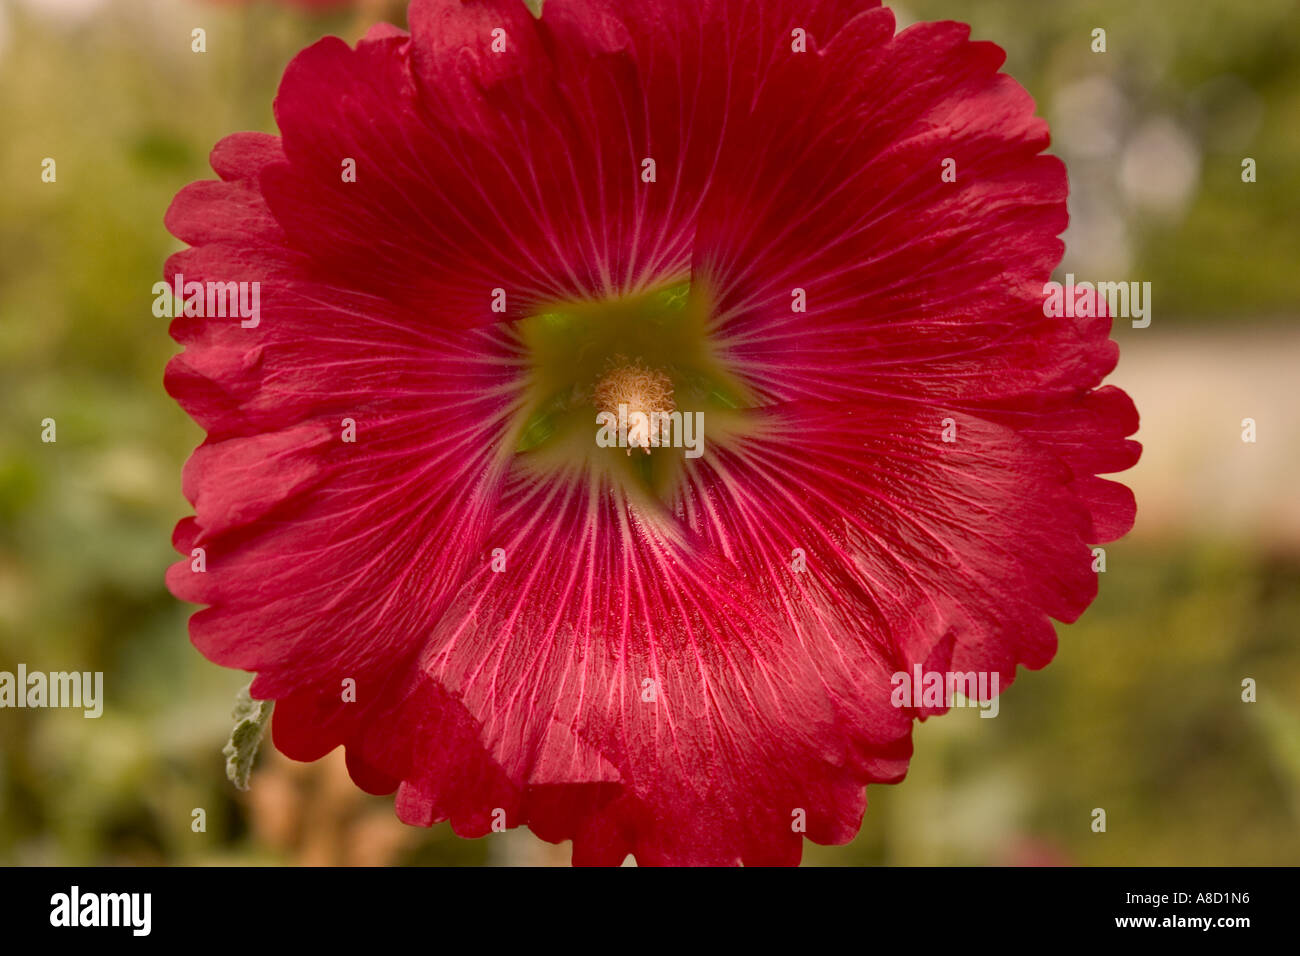 Close up of a red hollyhock flower Stock Photo